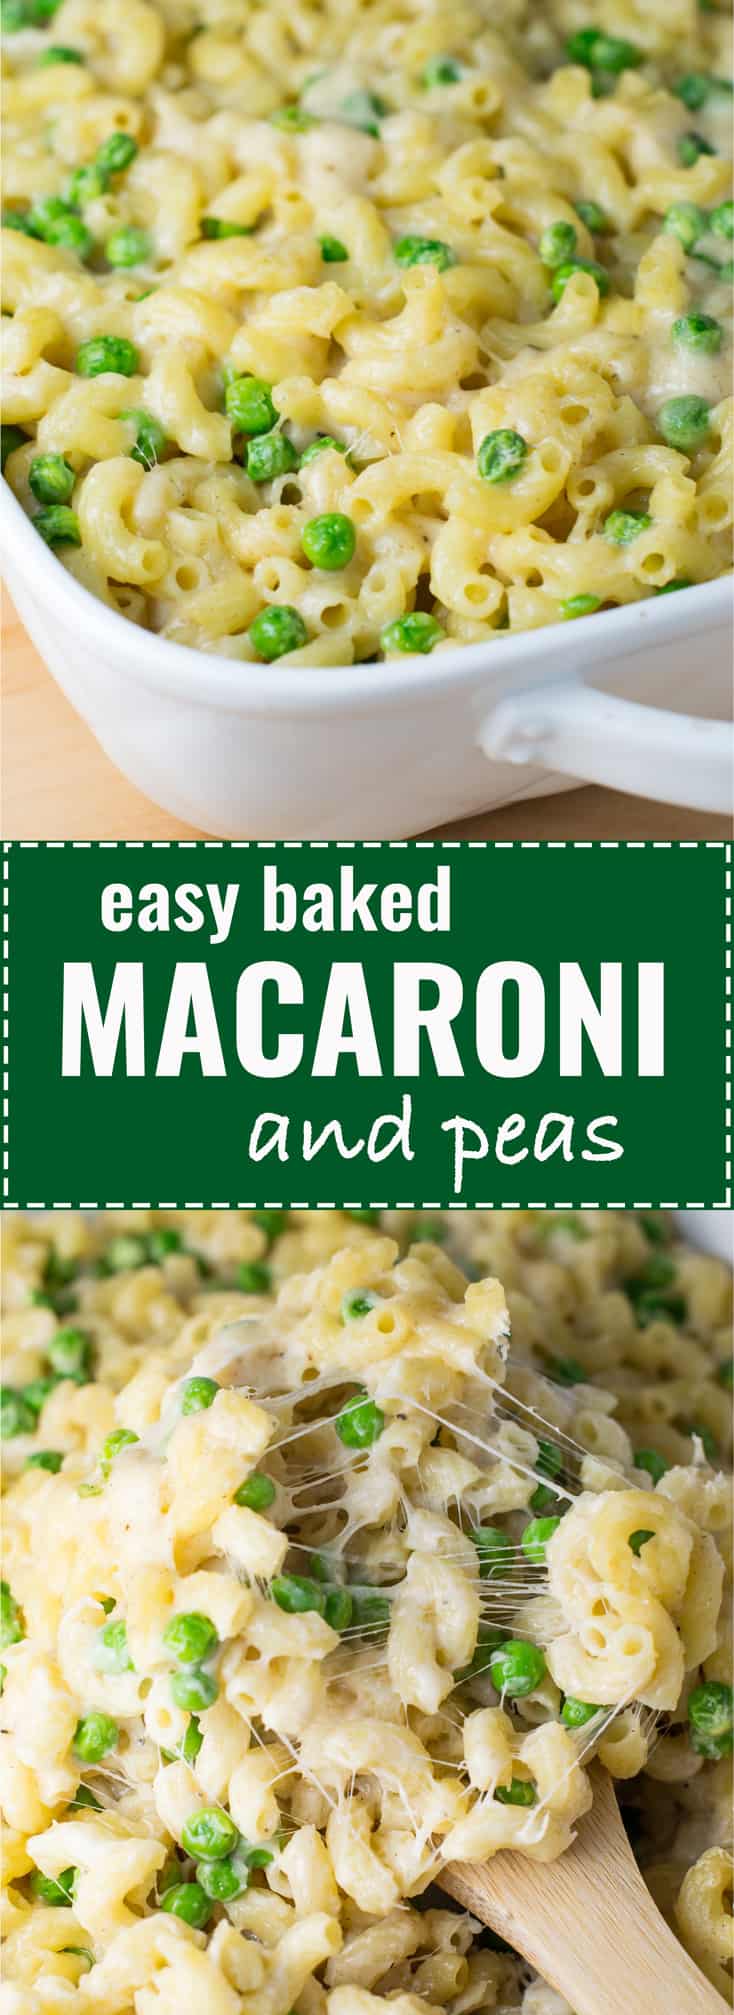 Easy baked macaroni and peas recipe - ready in less than 30 minutes! #macandcheese #macandpeas #dinner